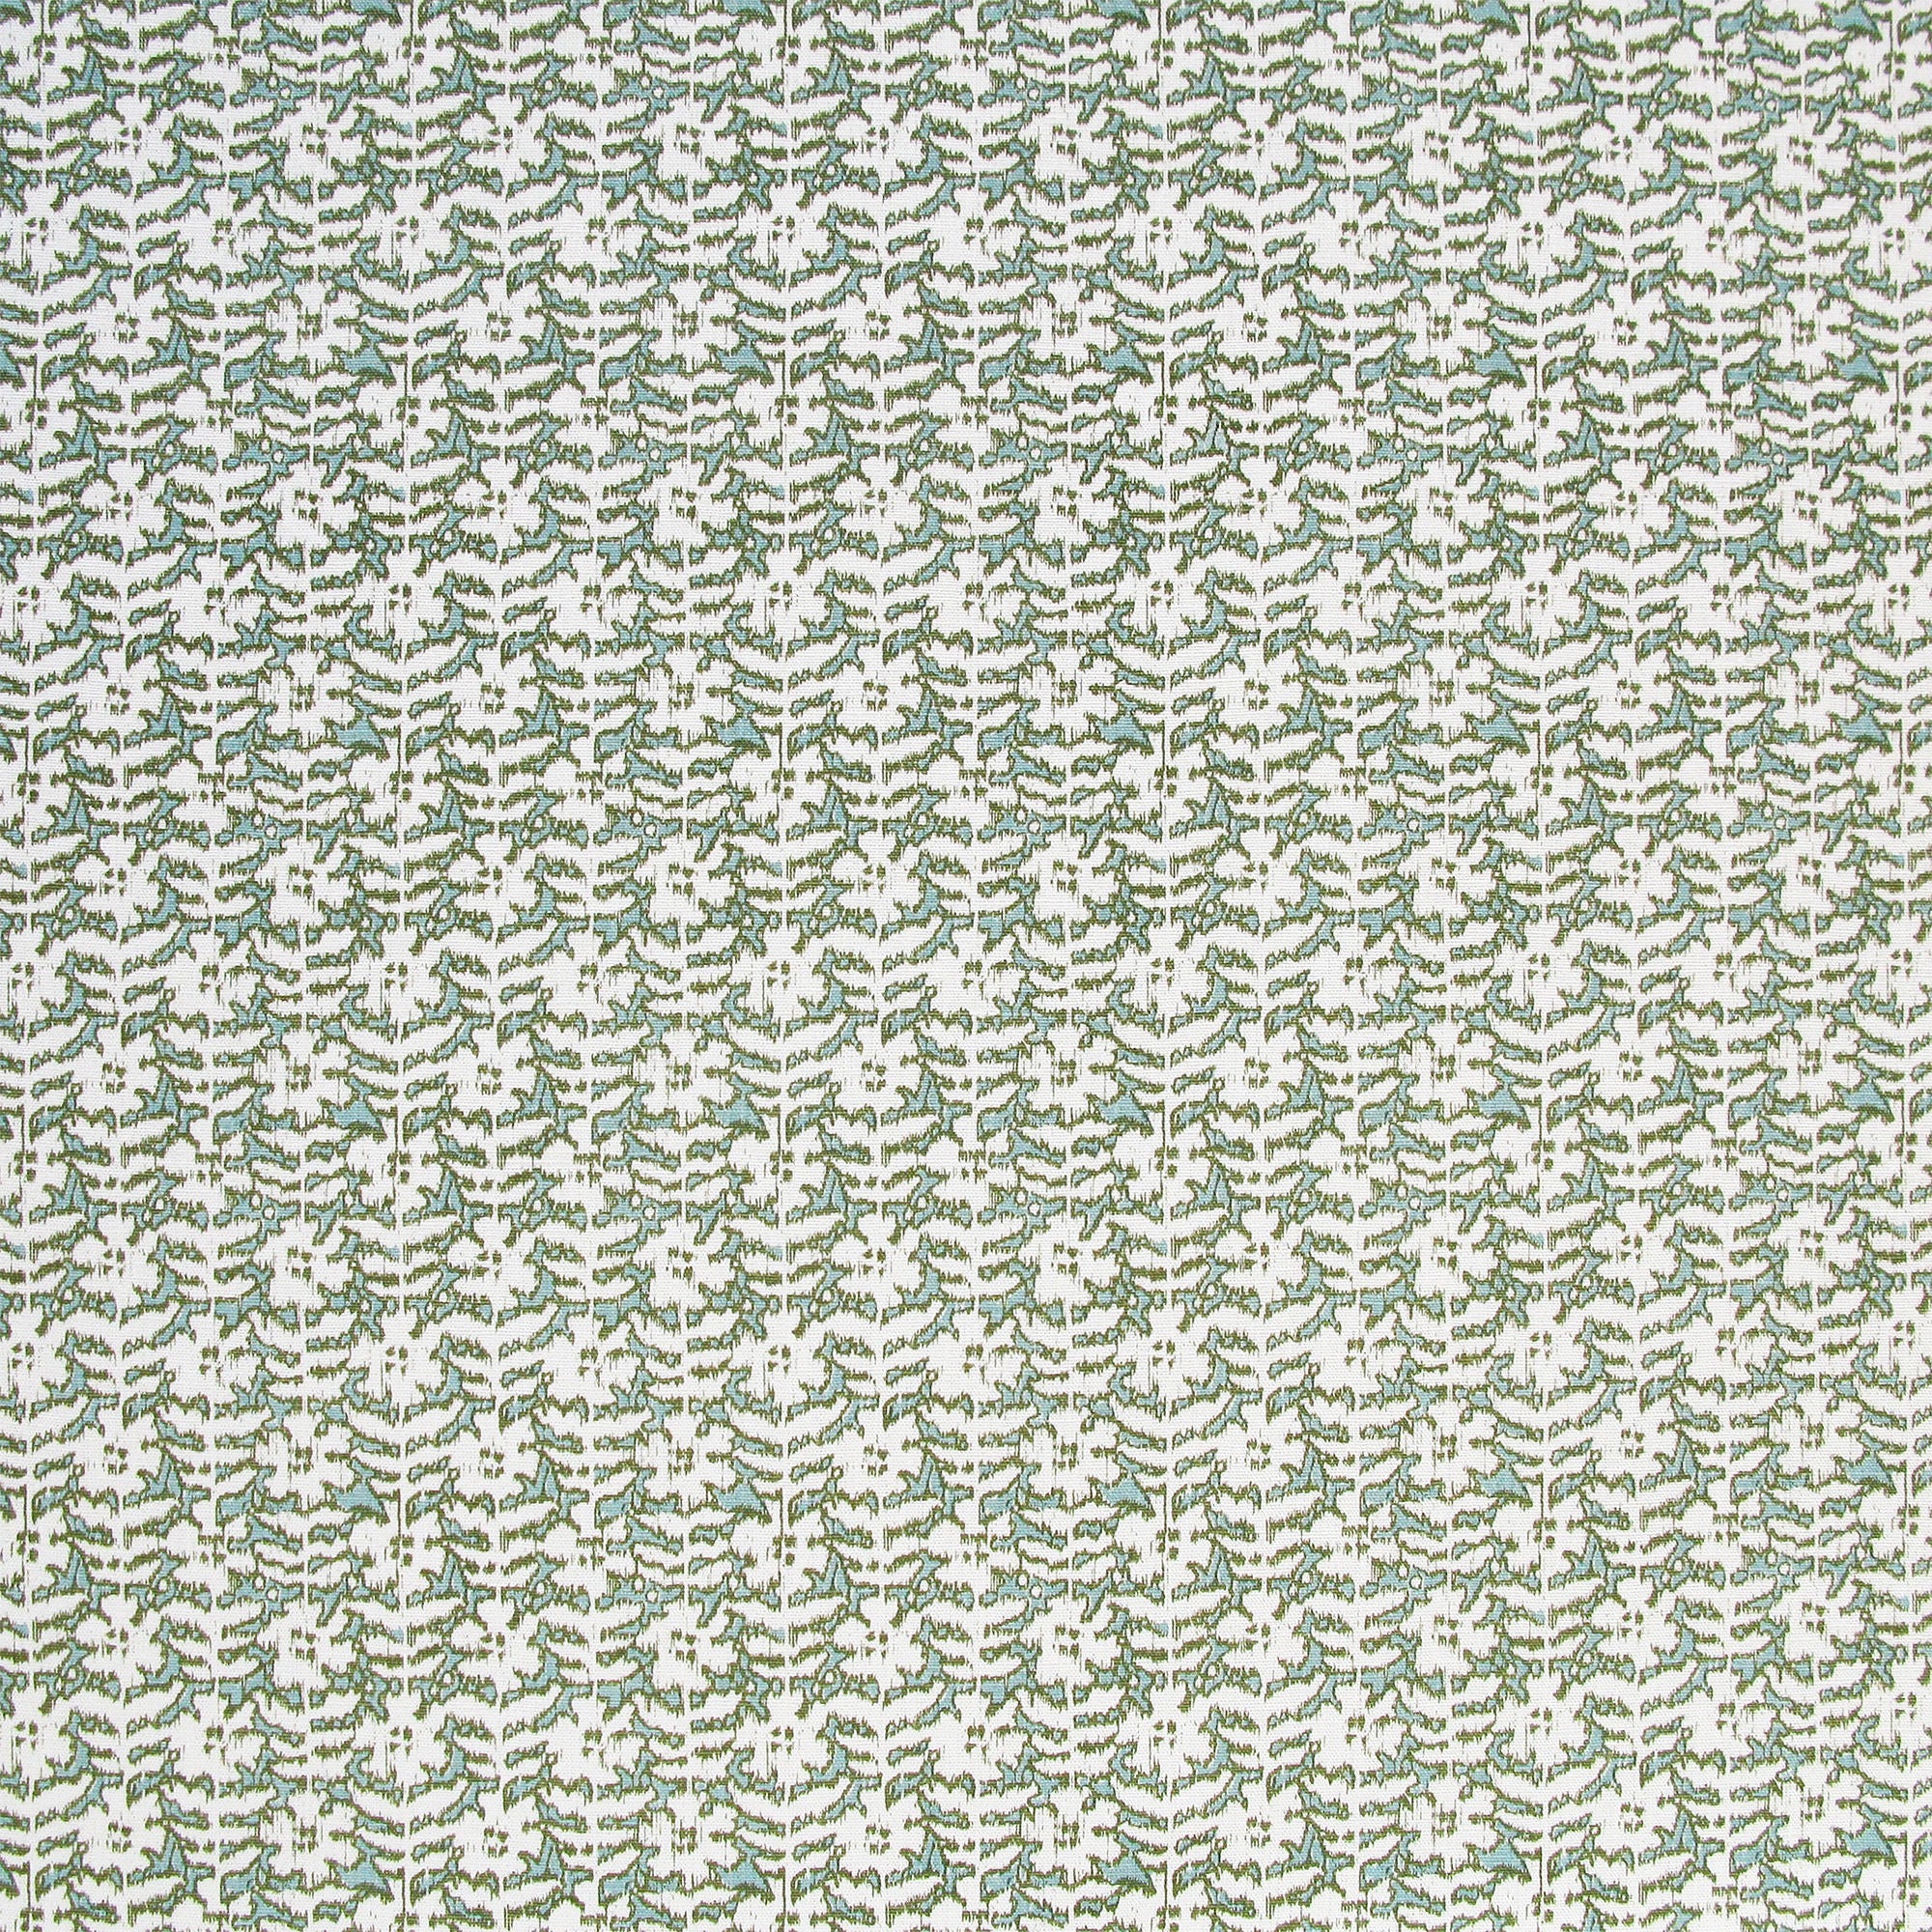 Detail of fabric in a floral grid print in white and sage on a light green field.